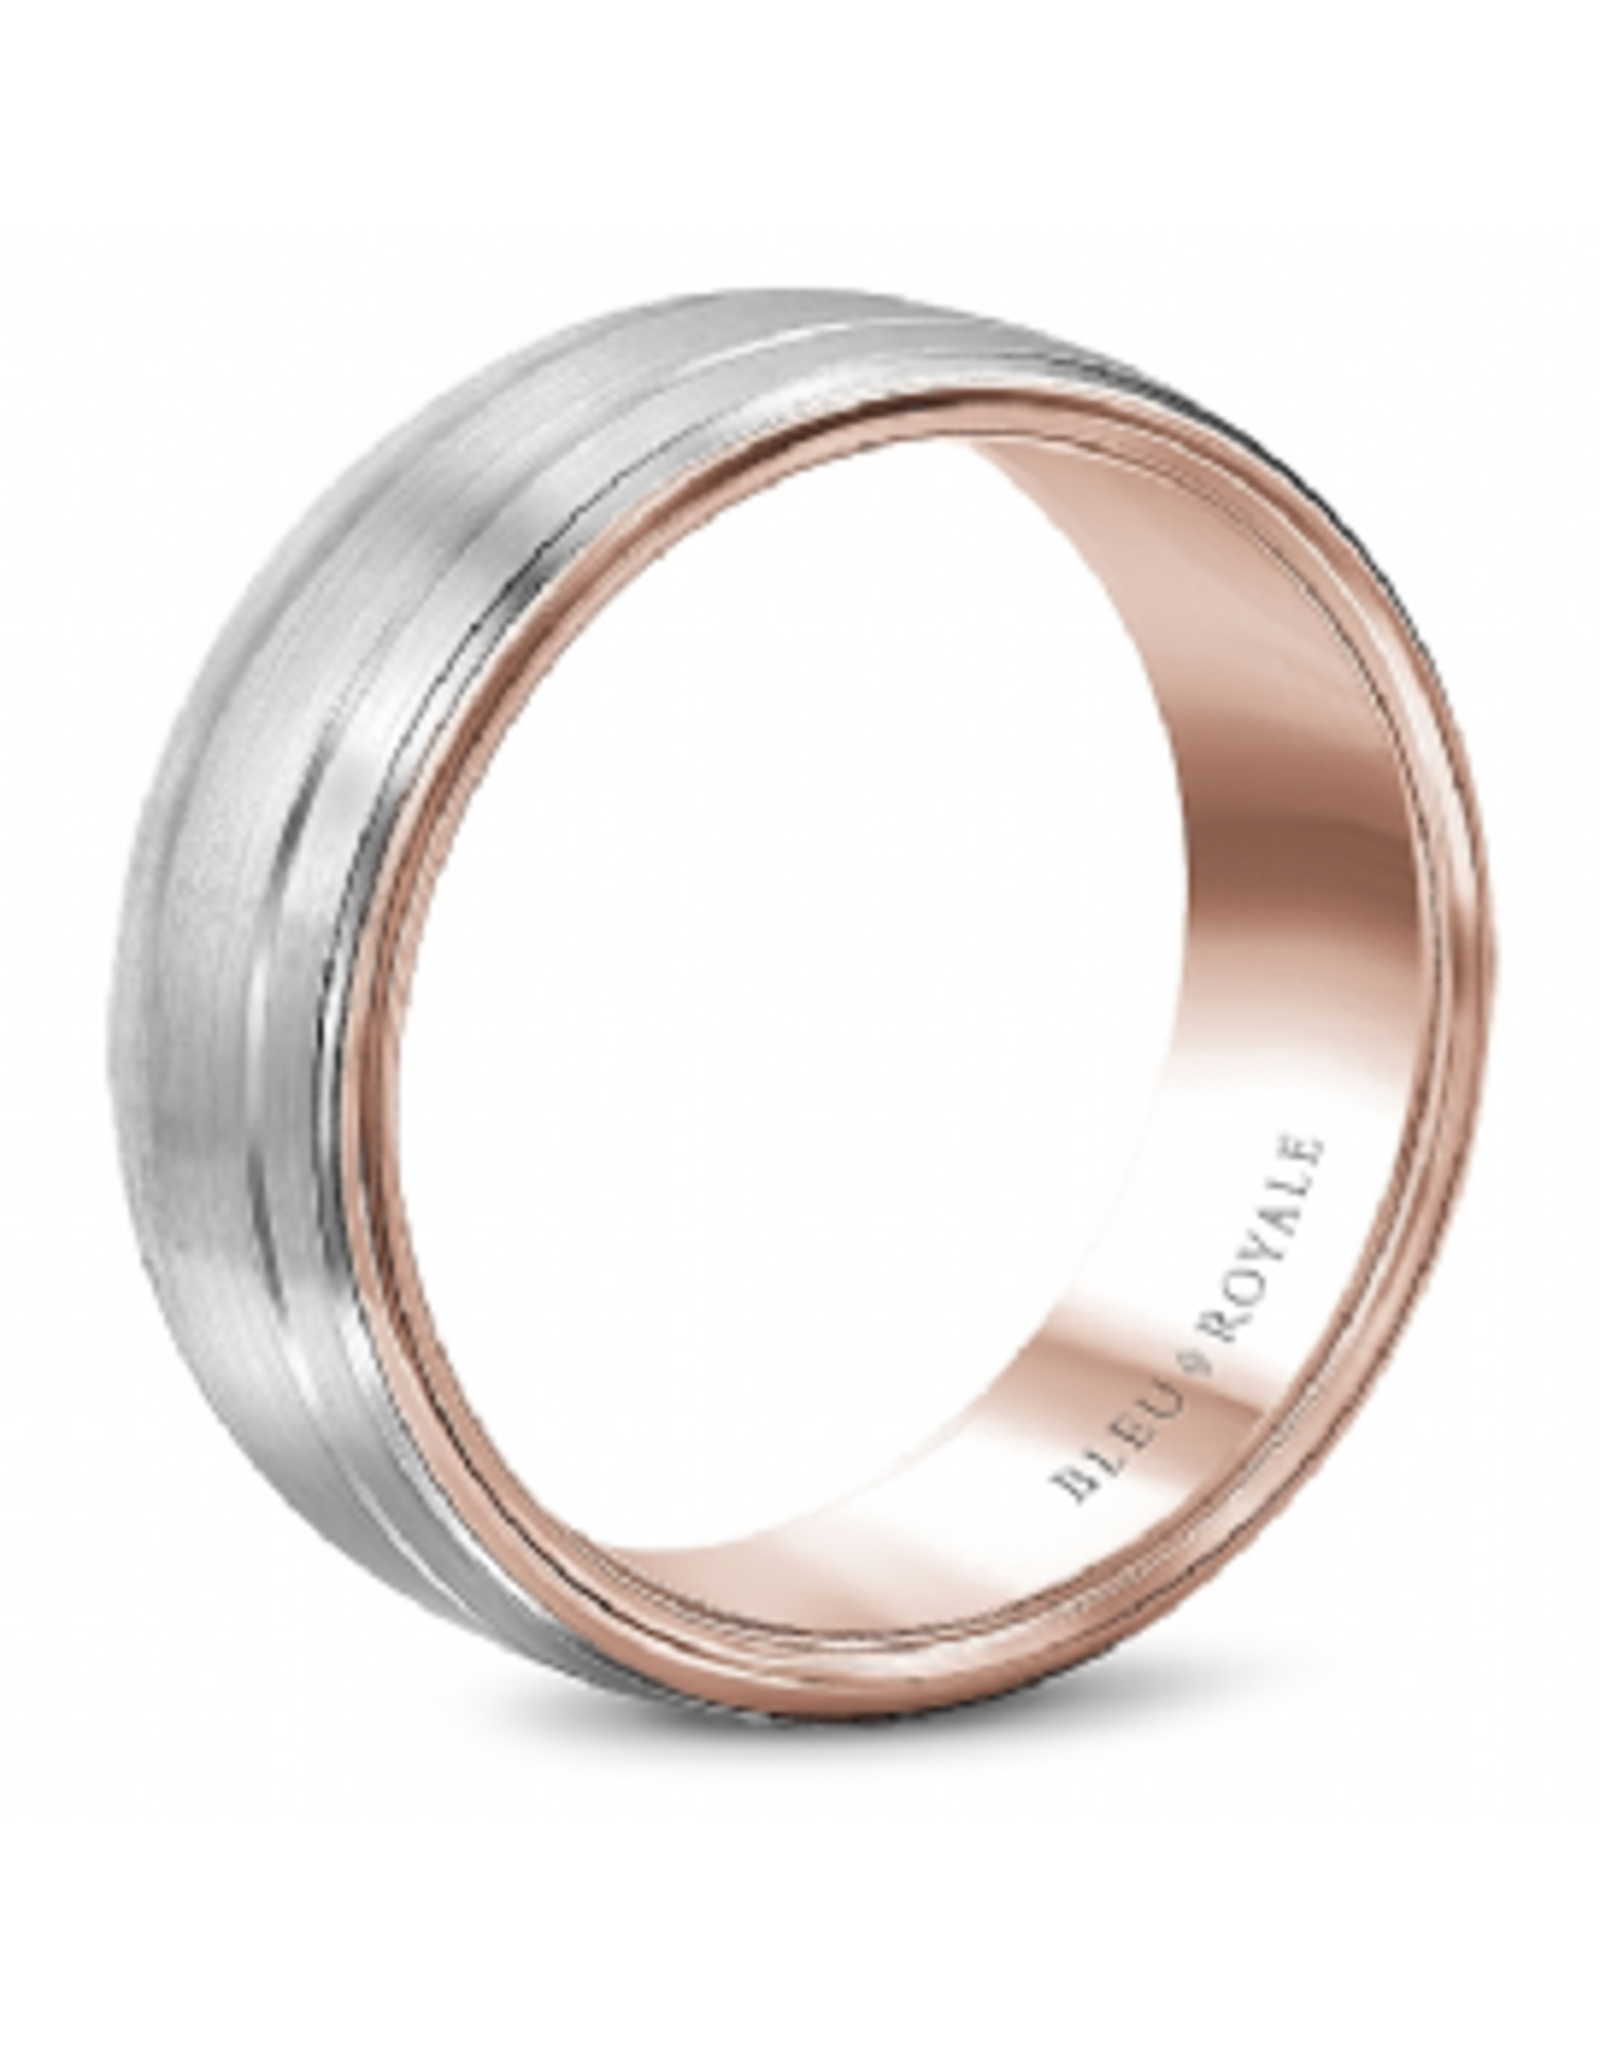 14K White and Rose Gold Band with Sandpaper Top & High Polish Edges - 8.5 mm